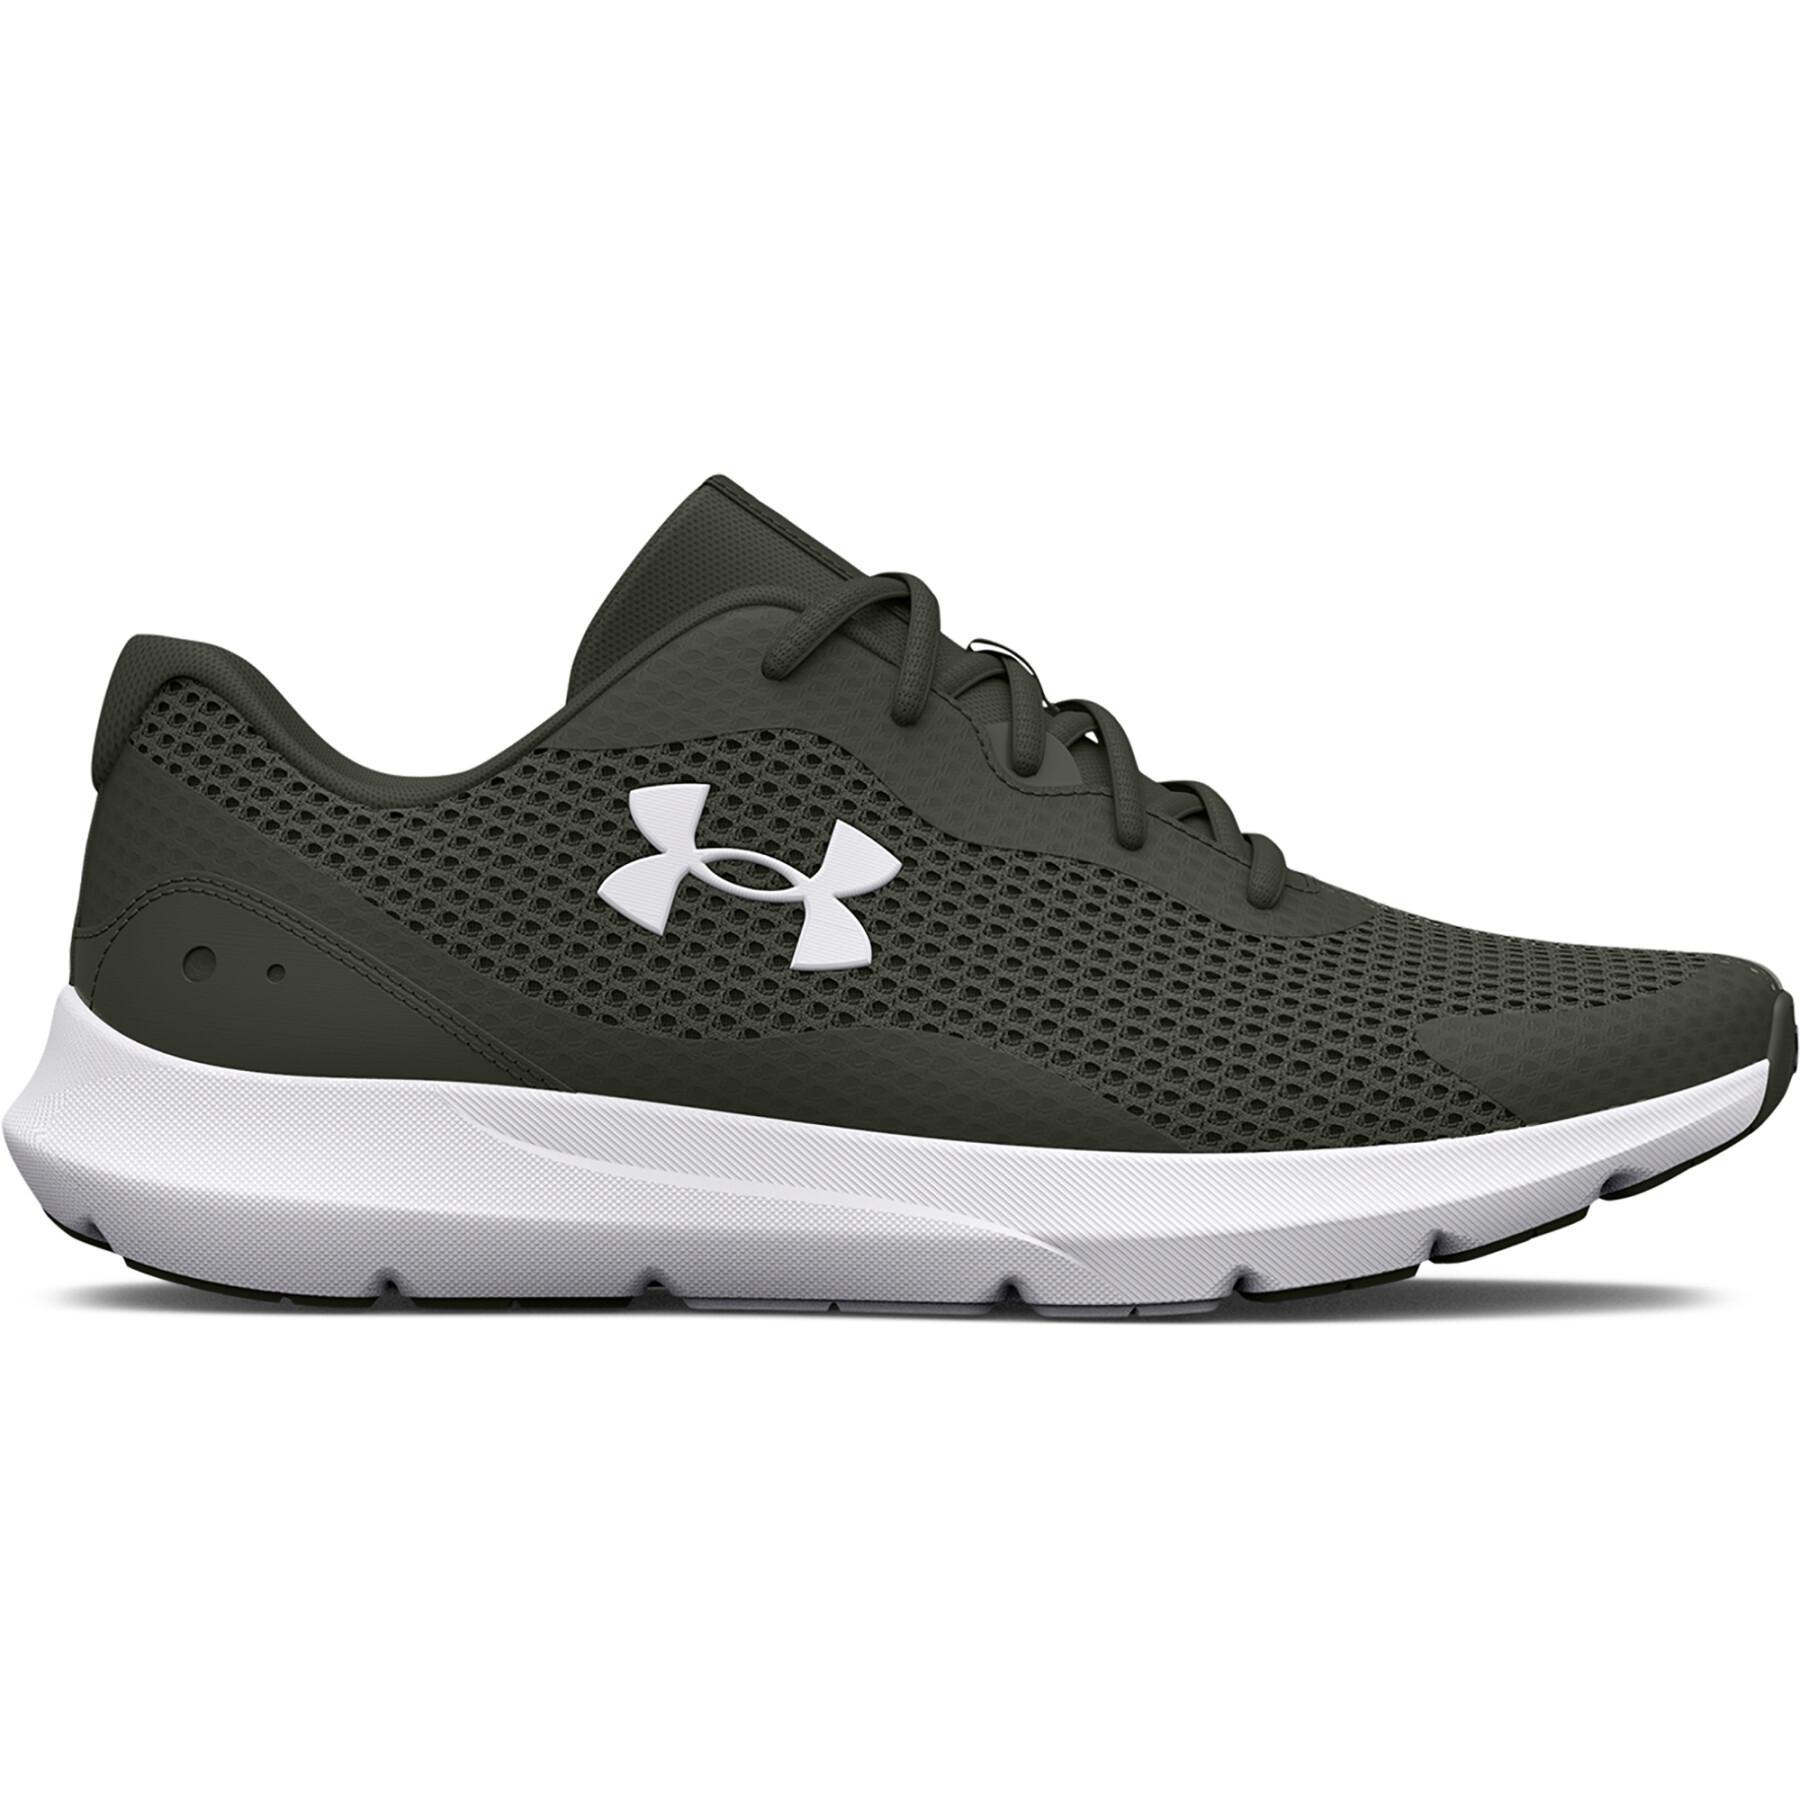 Running shoes Under Armour Surge 3